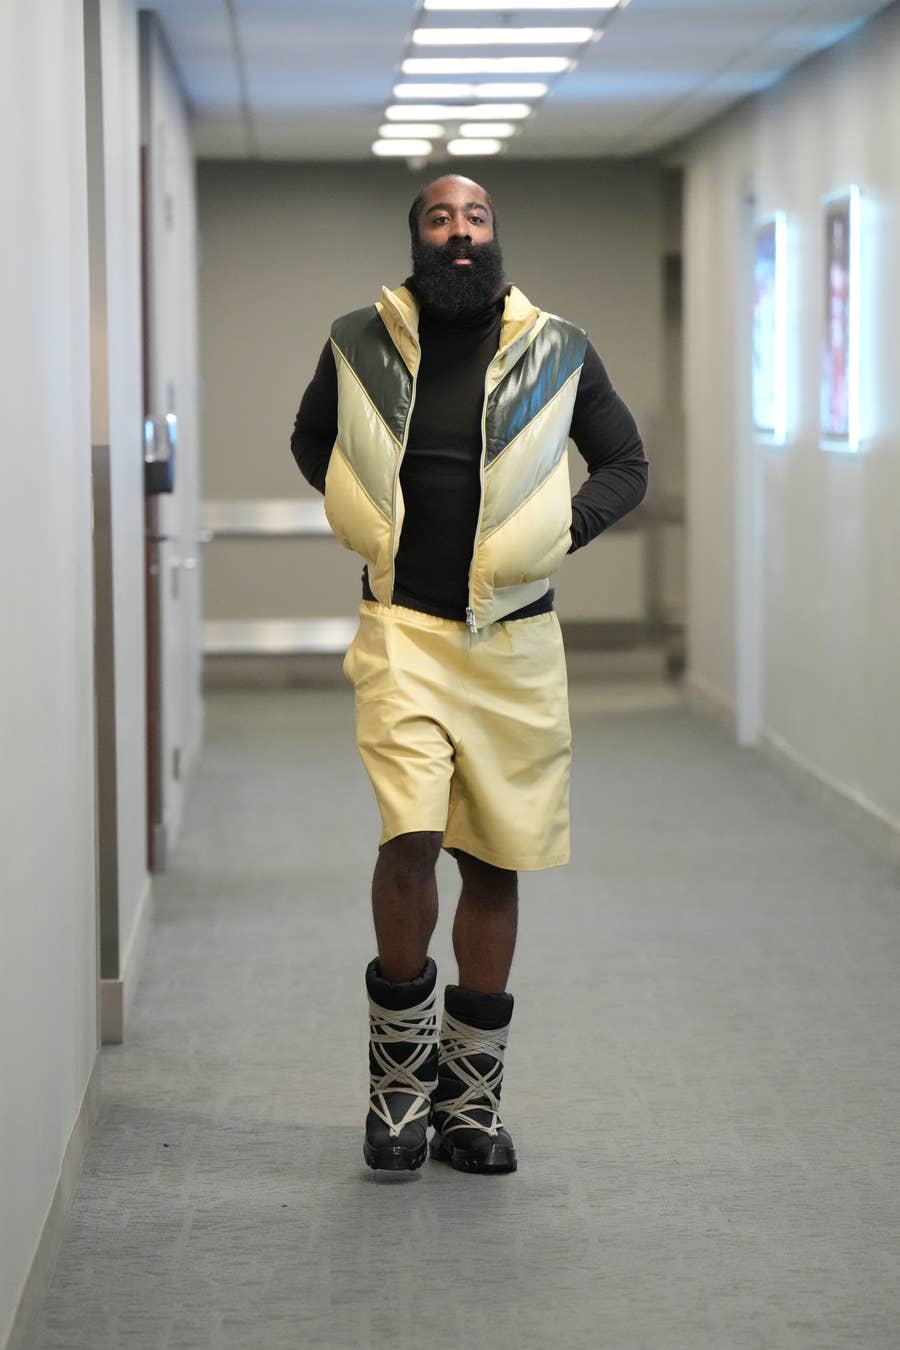 James Harden playoff outfit? A letterman jacket adorned with flamingo